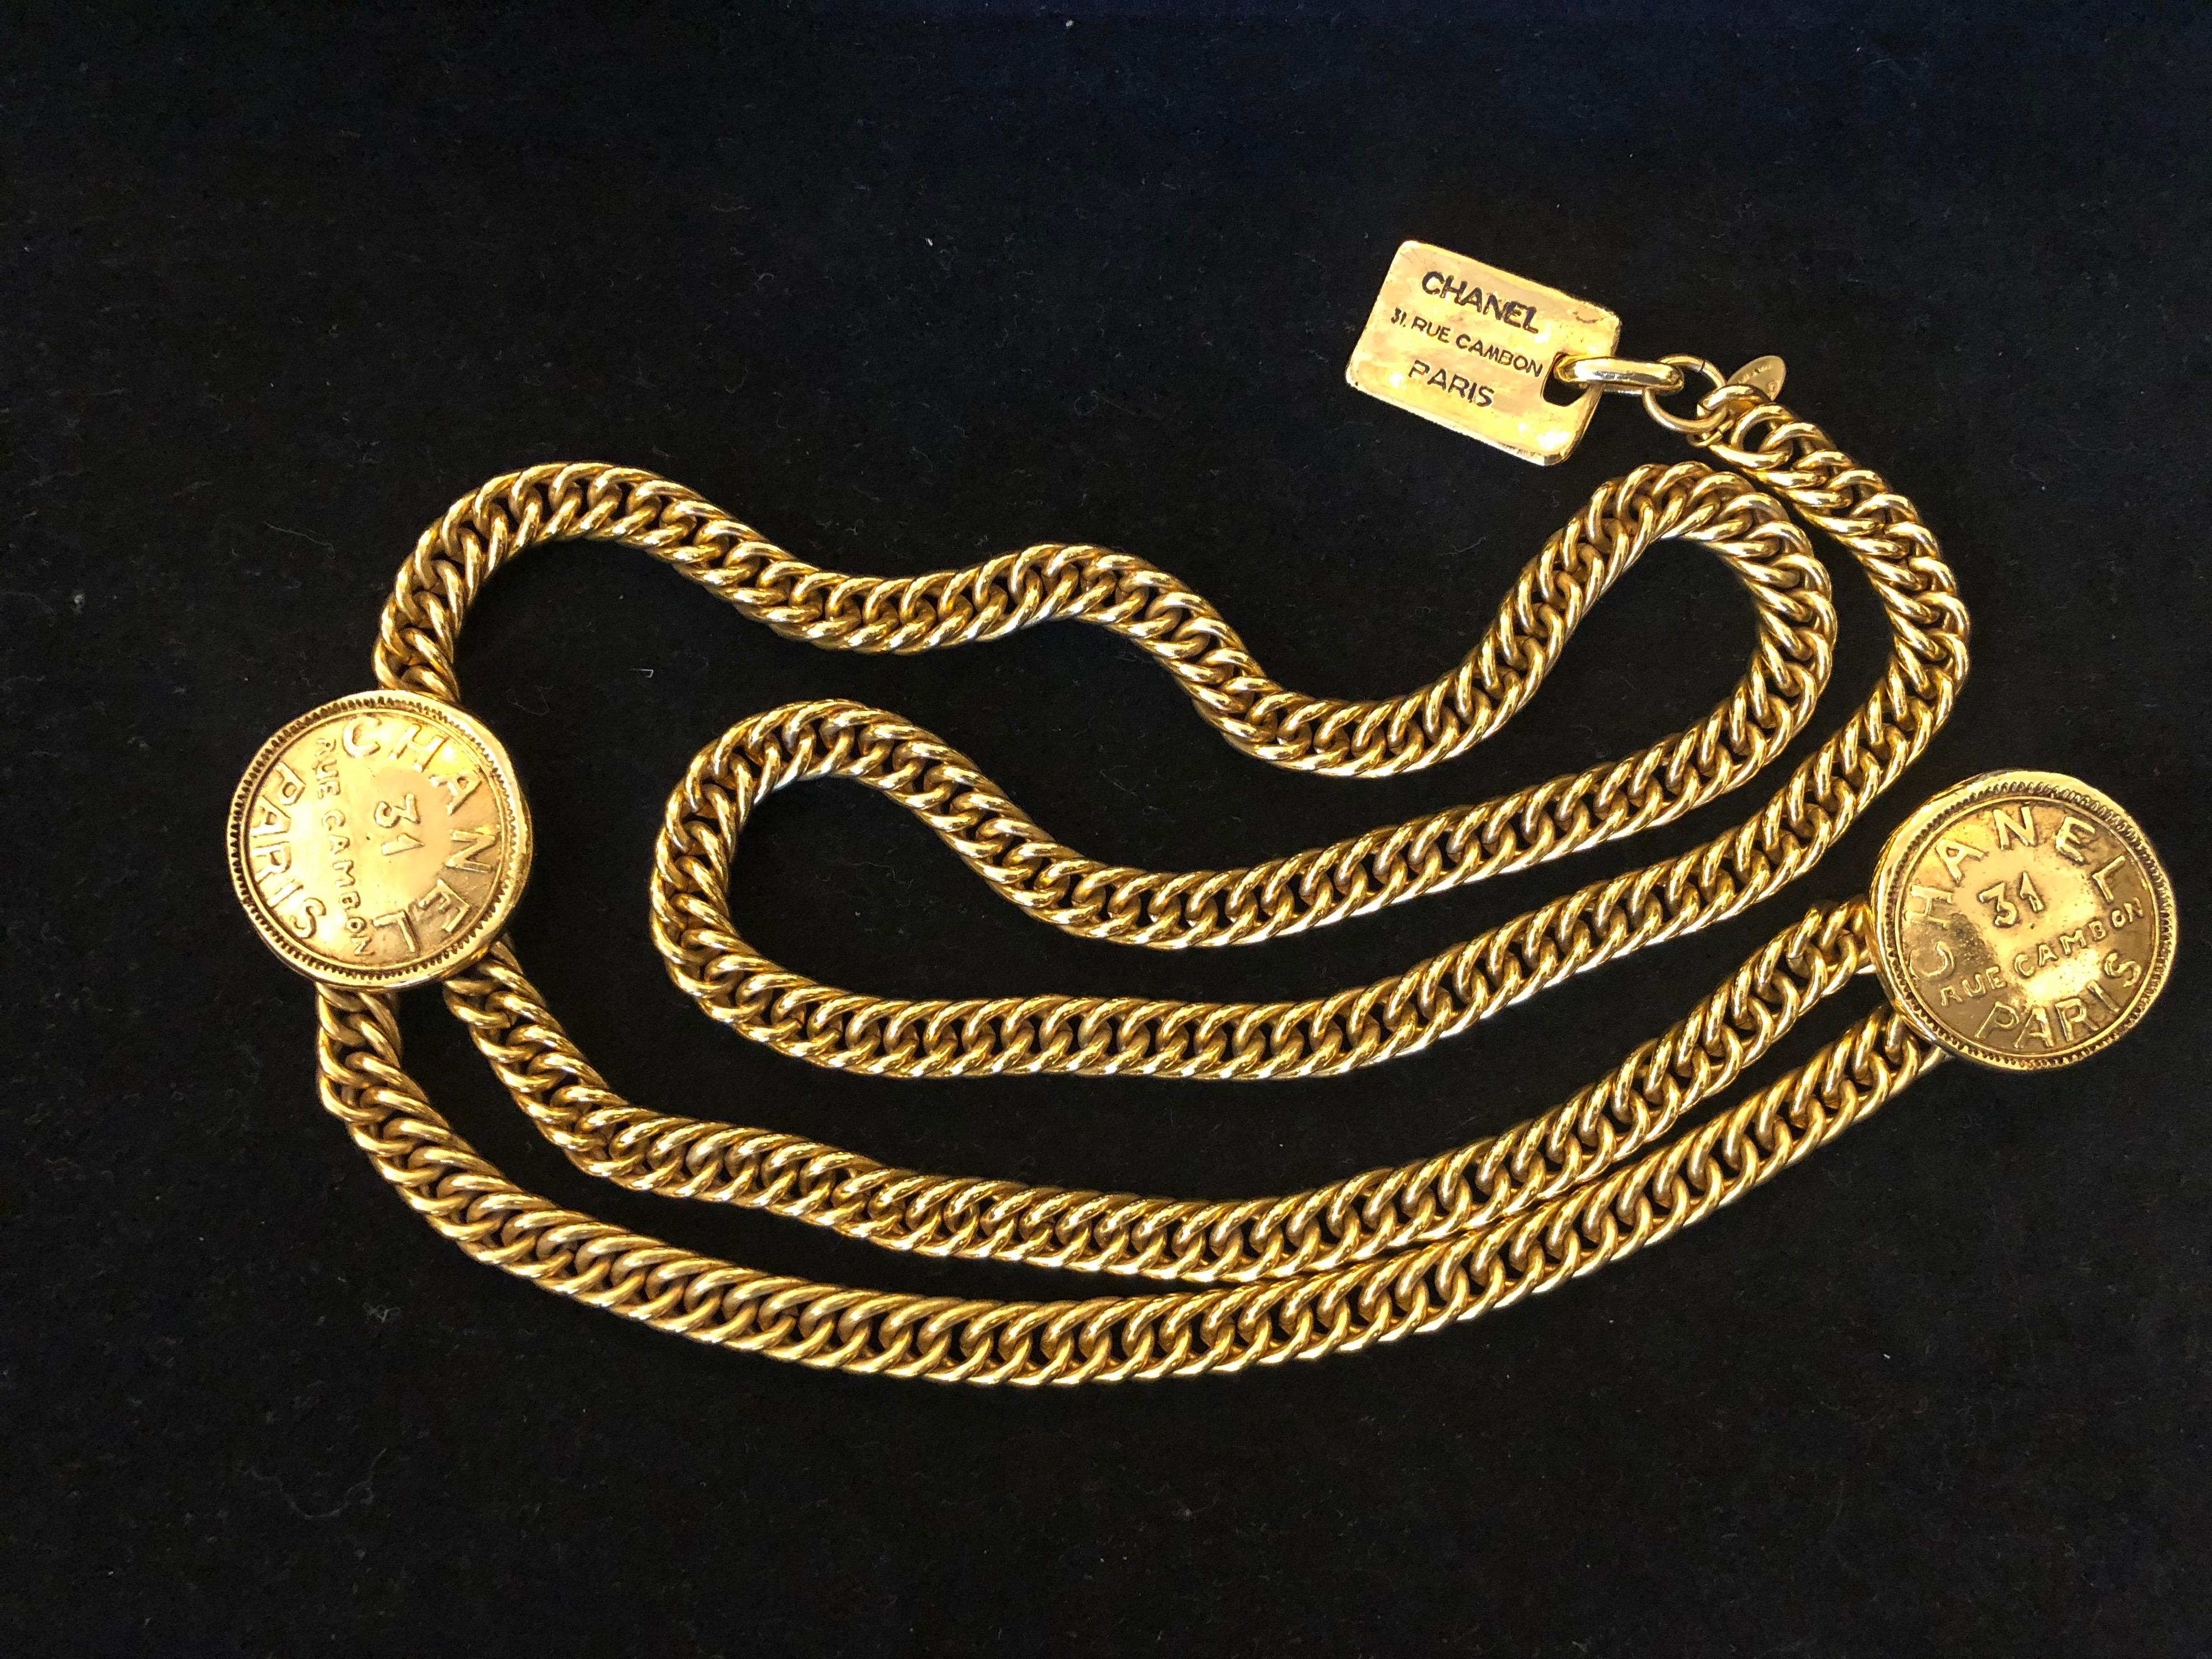 1980s Chanel gold toned chain belt featuring a double stranded front joined by two Cambon medallions and a dangly Cambon charm. Adjustable hook fastening. It can be worn as a necklace or belt. Stamped Chanel made in France. Length approximately 84